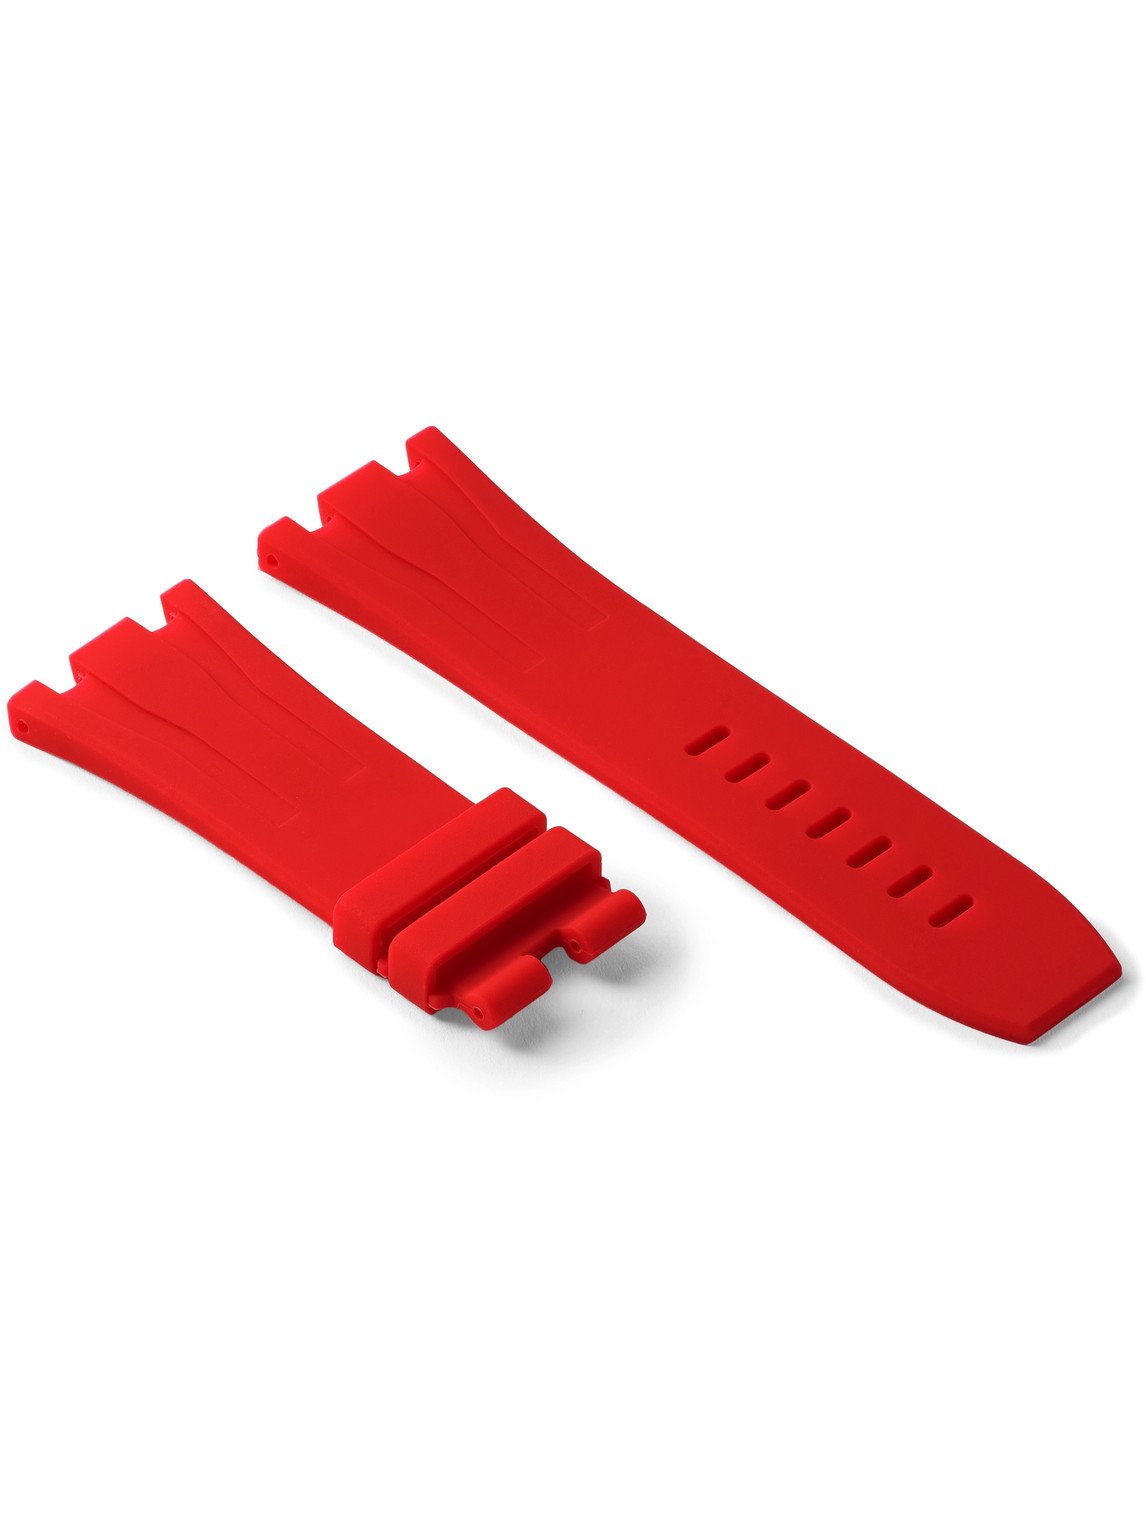 HORUS WATCH STRAPS TANG 44MM RUBBER WATCH STRAP